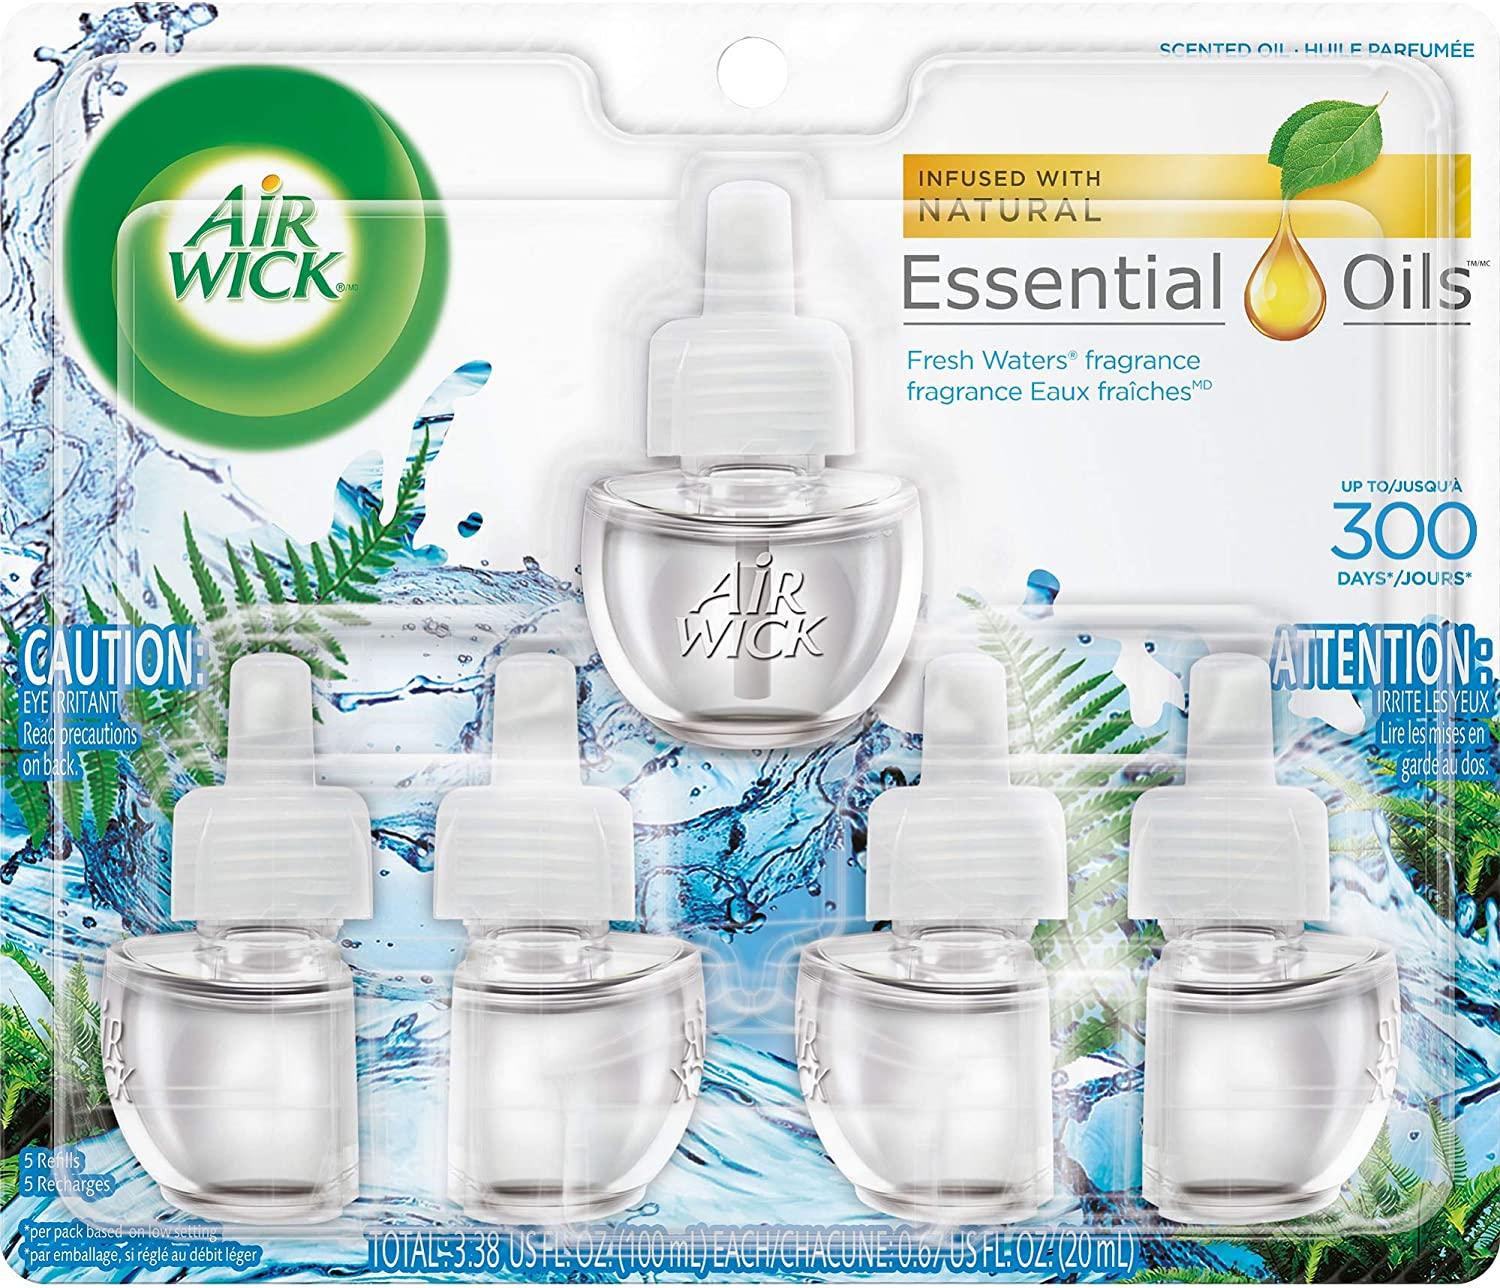 5 Air Wick Plug-in Scented Oil Refills for $4.88 Shipped